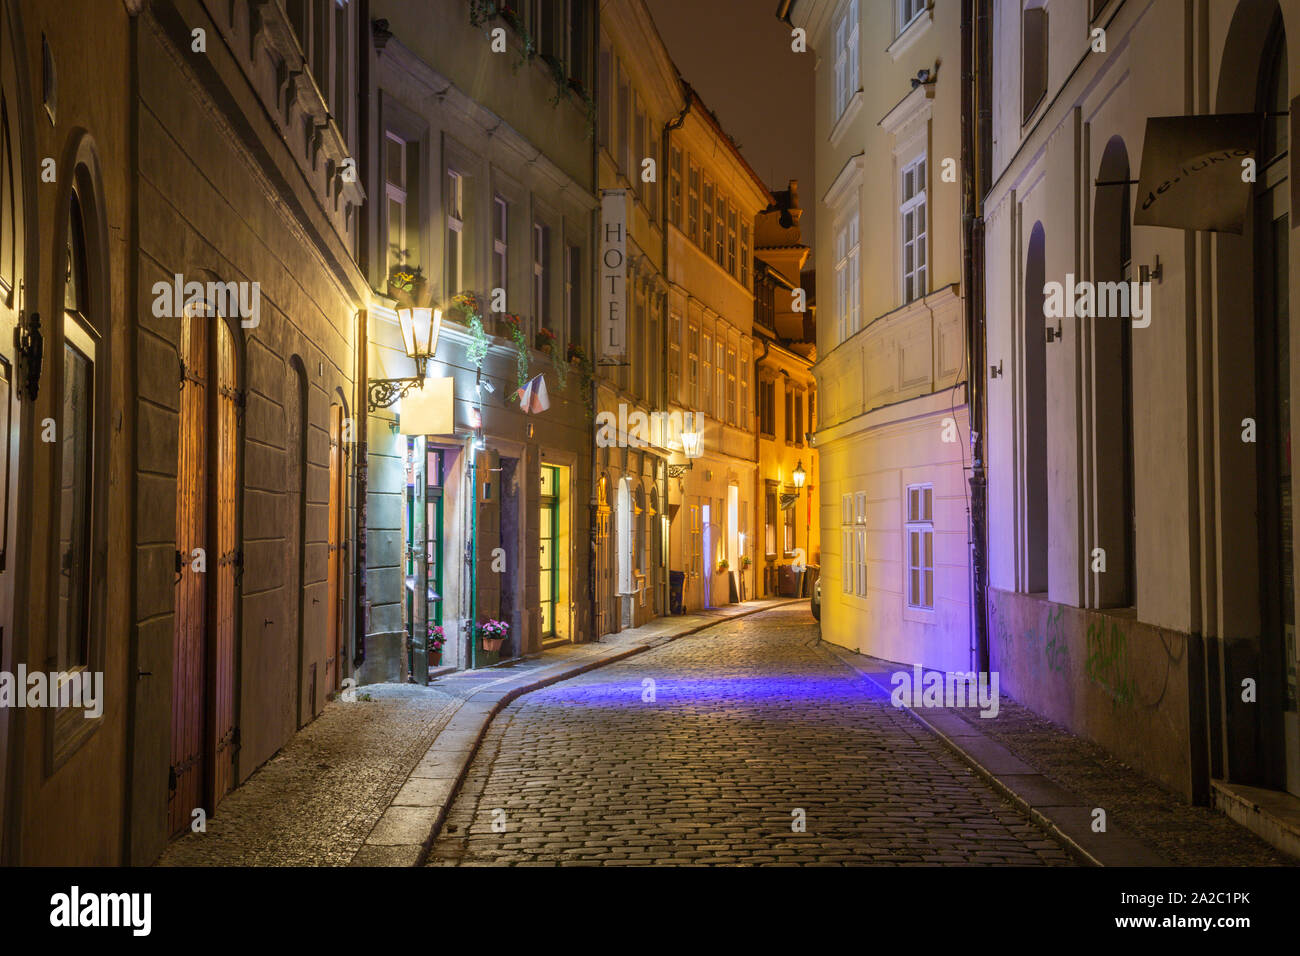 PRAGUE, CZECH REPUBLIC - OCTOBER 17, 2018: The aisle of Old Town at the night. Stock Photo